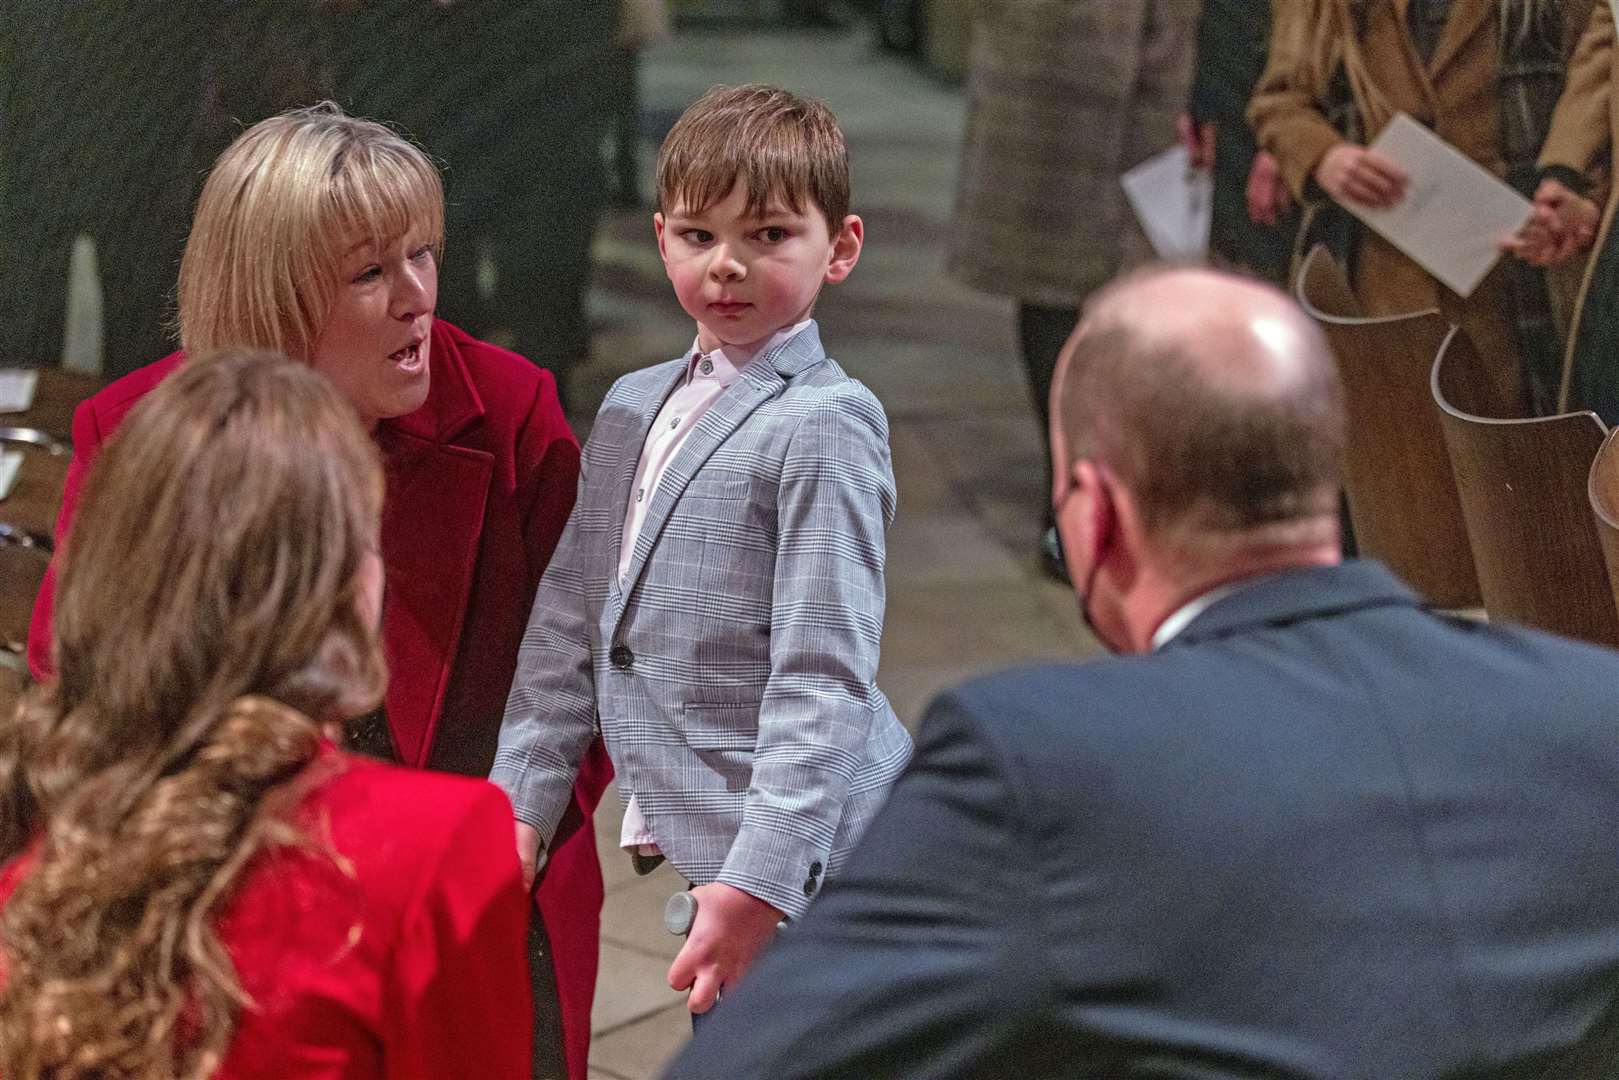 Tony Hudgell, then seven, with his mother Paula Hudgell, meeting the royal couple at a carol service at Westminster Abbey in 2021 (Heathcliff O’Malley/PA).